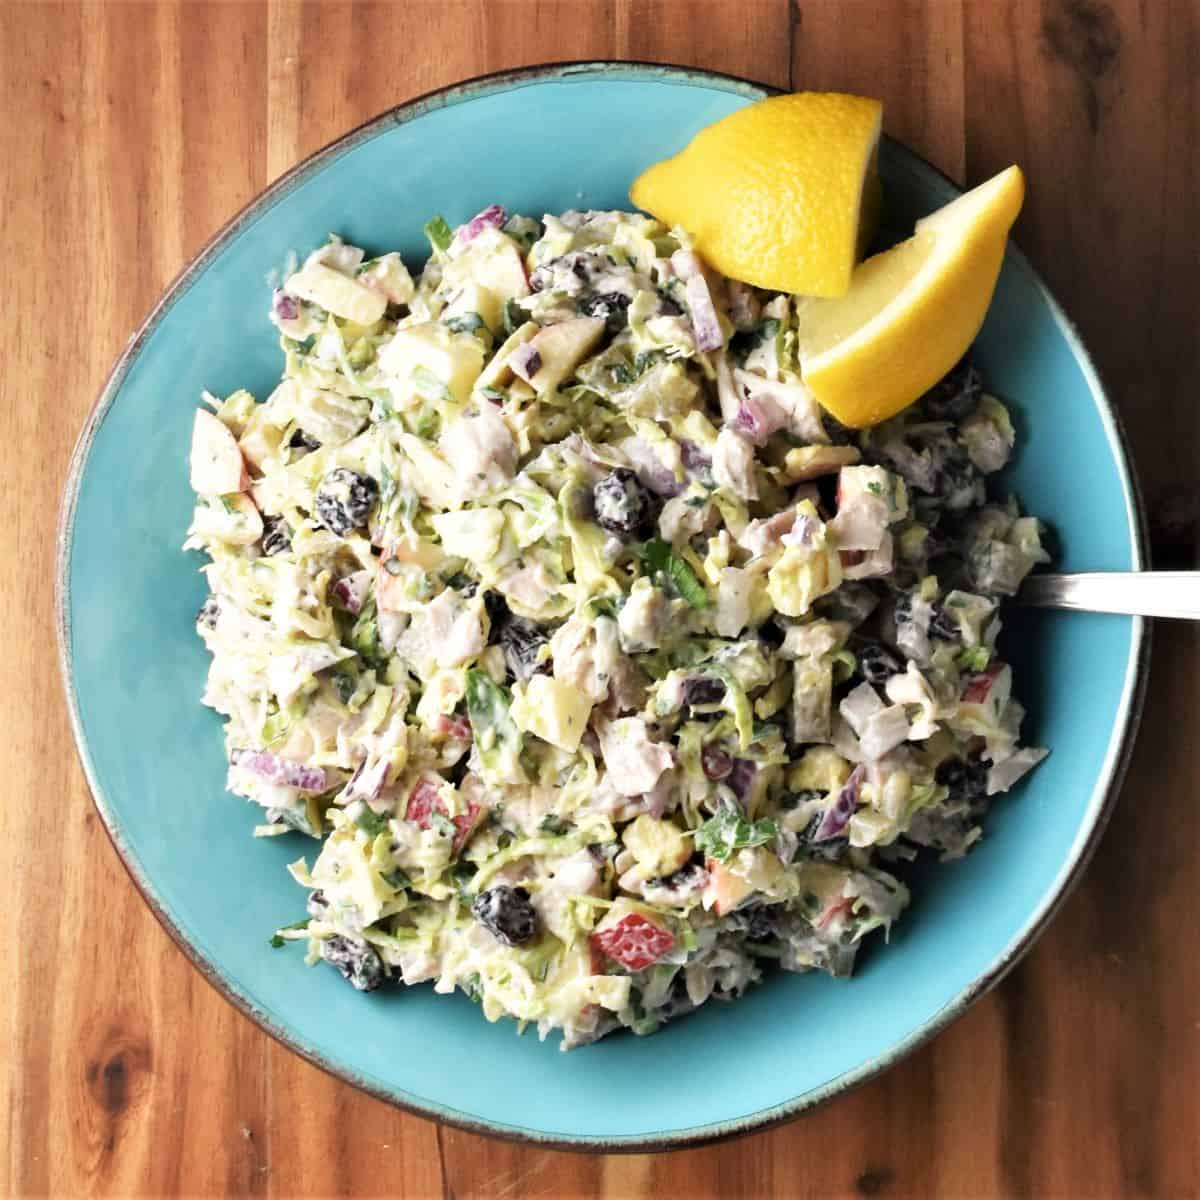 Top down view of turkey cranberry salad with lemon in blue bowl.